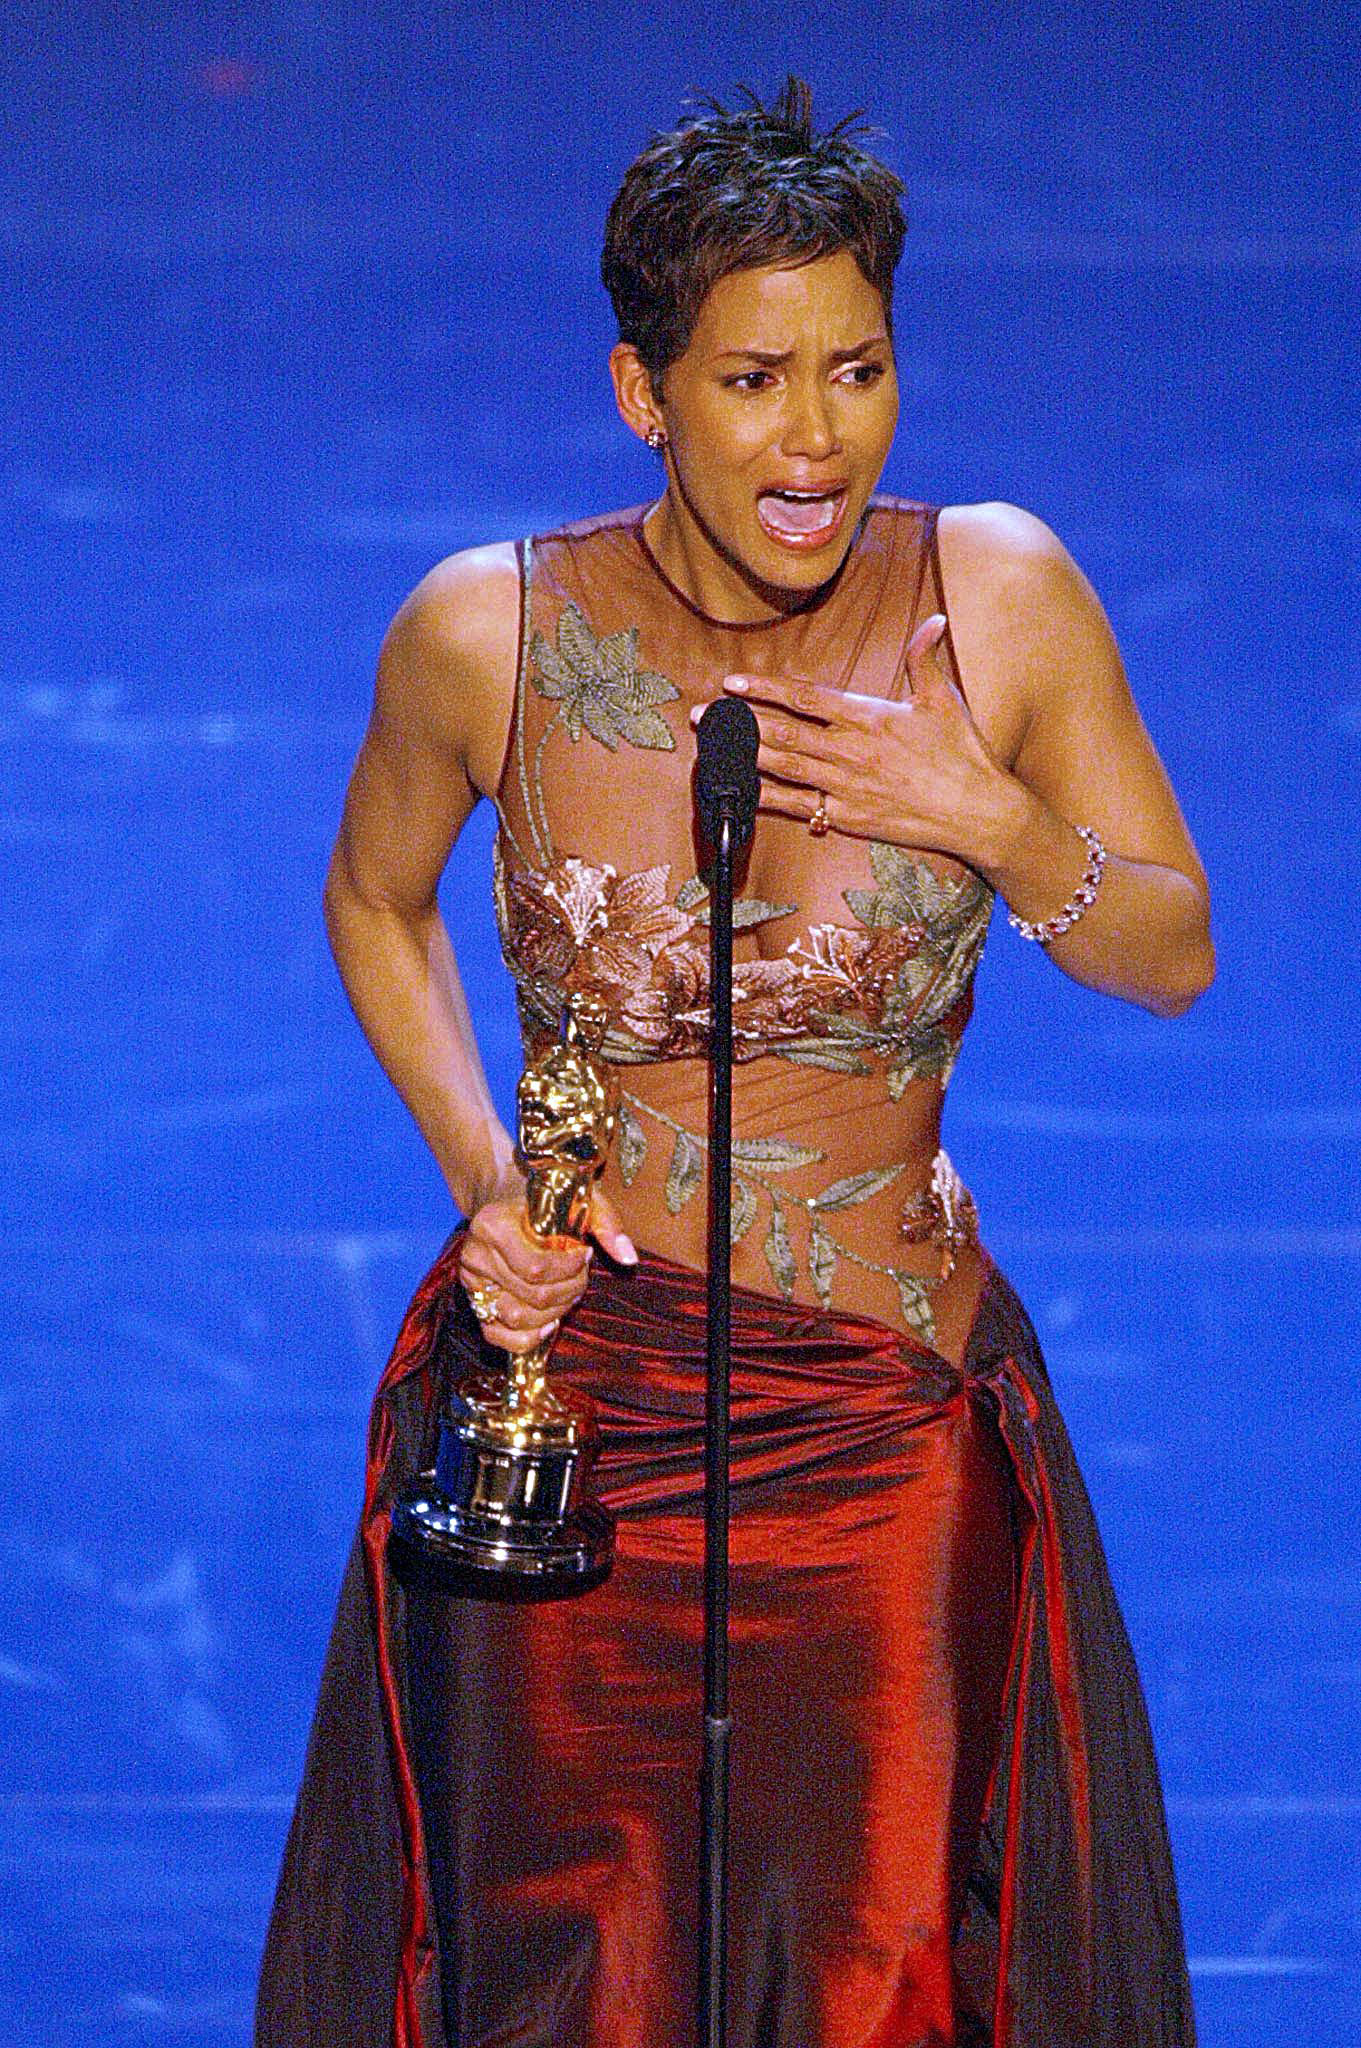 PHOTO: Halle Berry accepts her Oscar for Best performance by an actress in a leading role during the 74th Academy Awards at the Kodak Theatre in Hollywood, March 24, 2002.